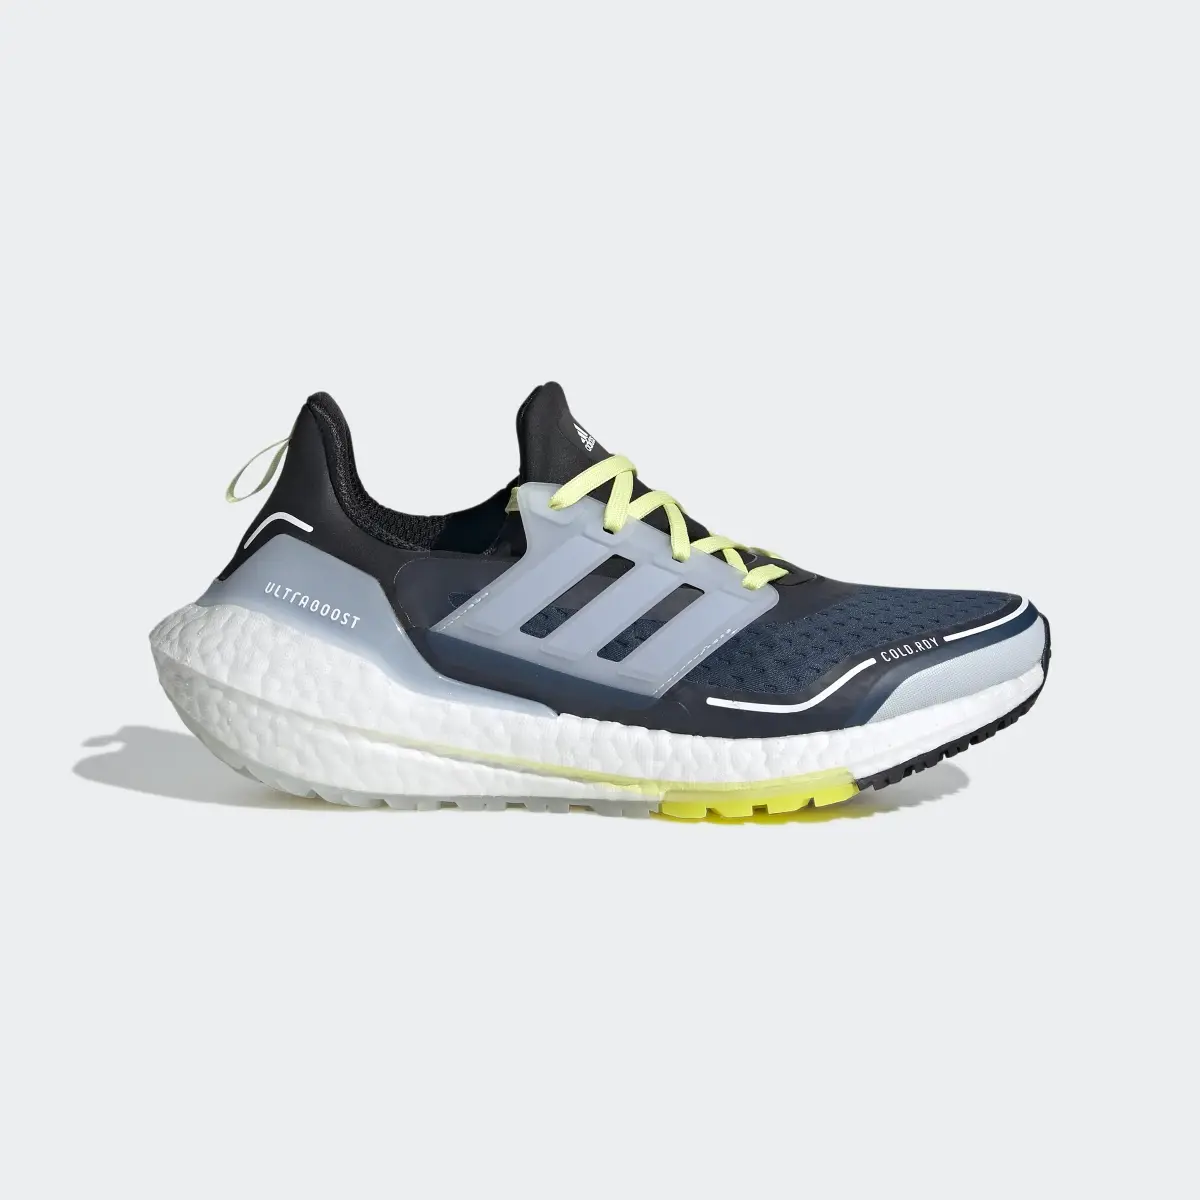 Adidas Ultraboost 21 COLD.RDY Shoes. 2